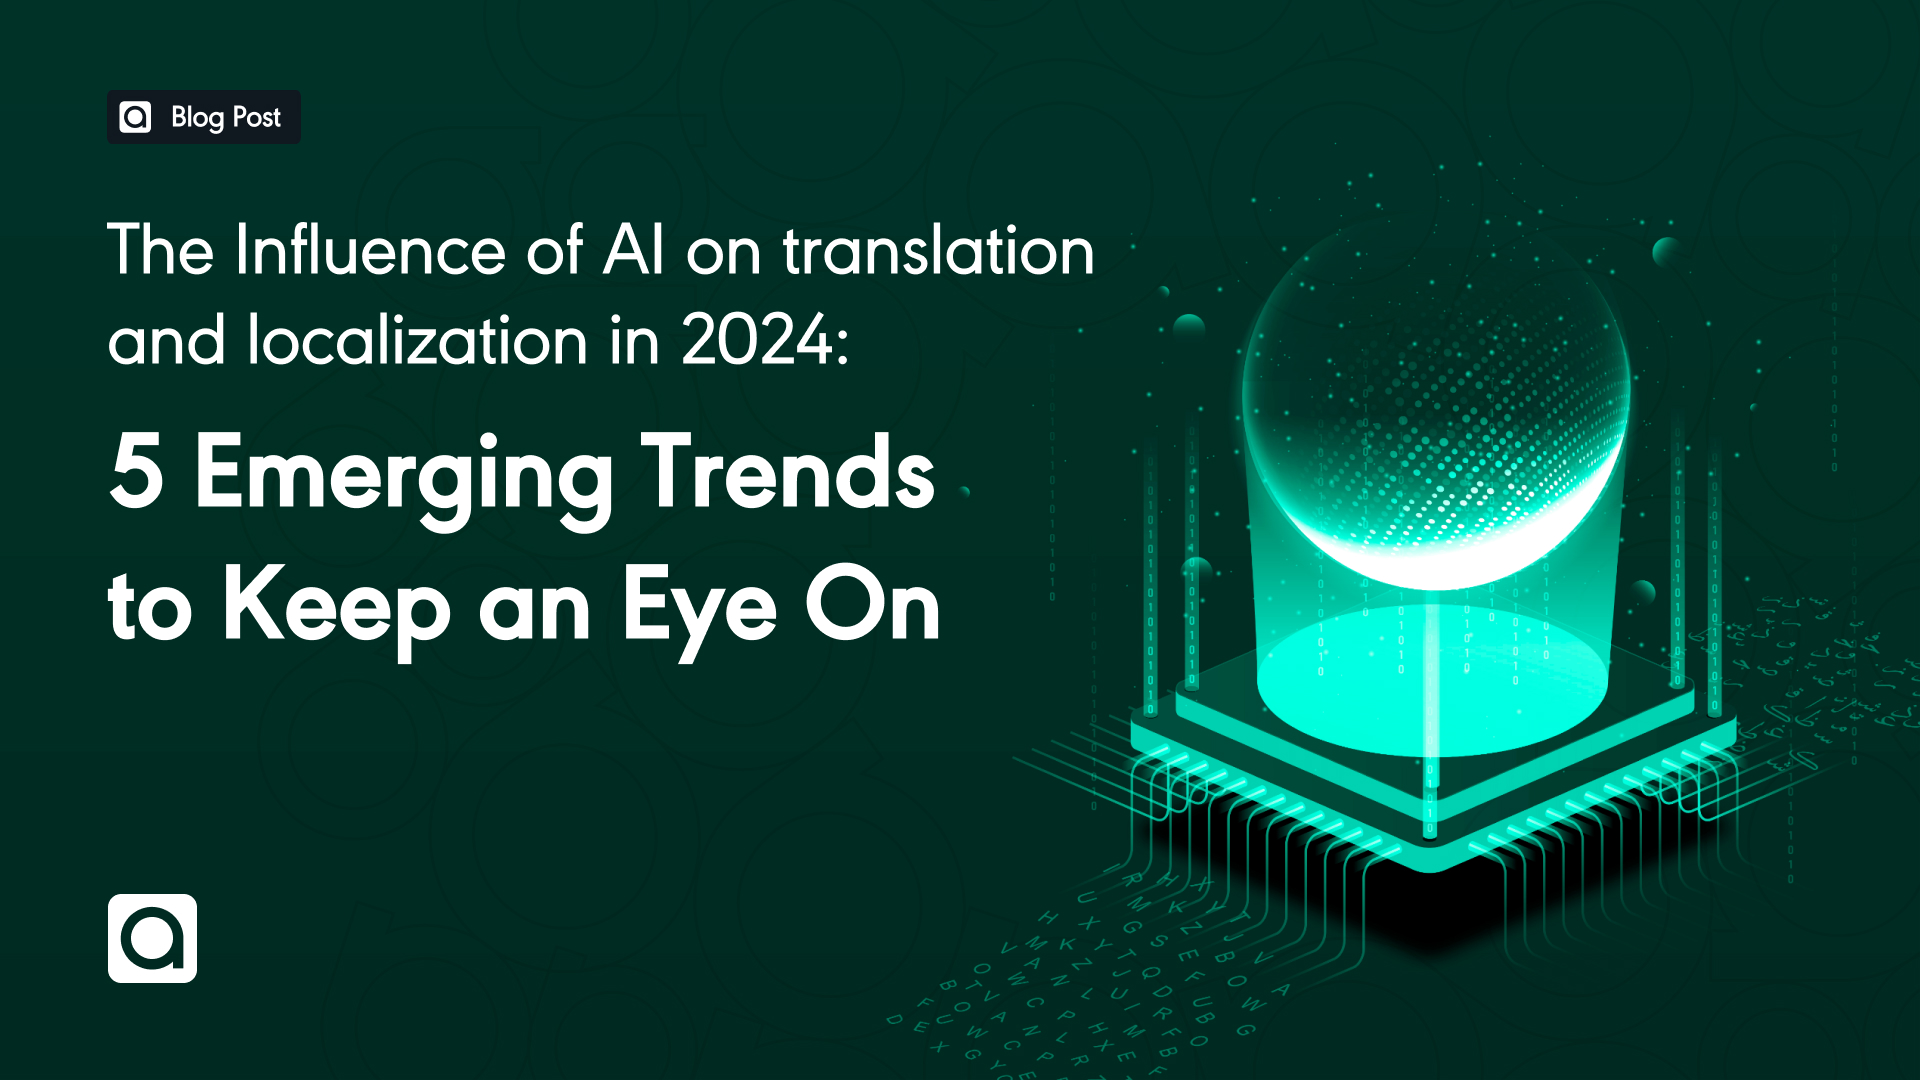 The Influence of AI on translation and localization in 2024